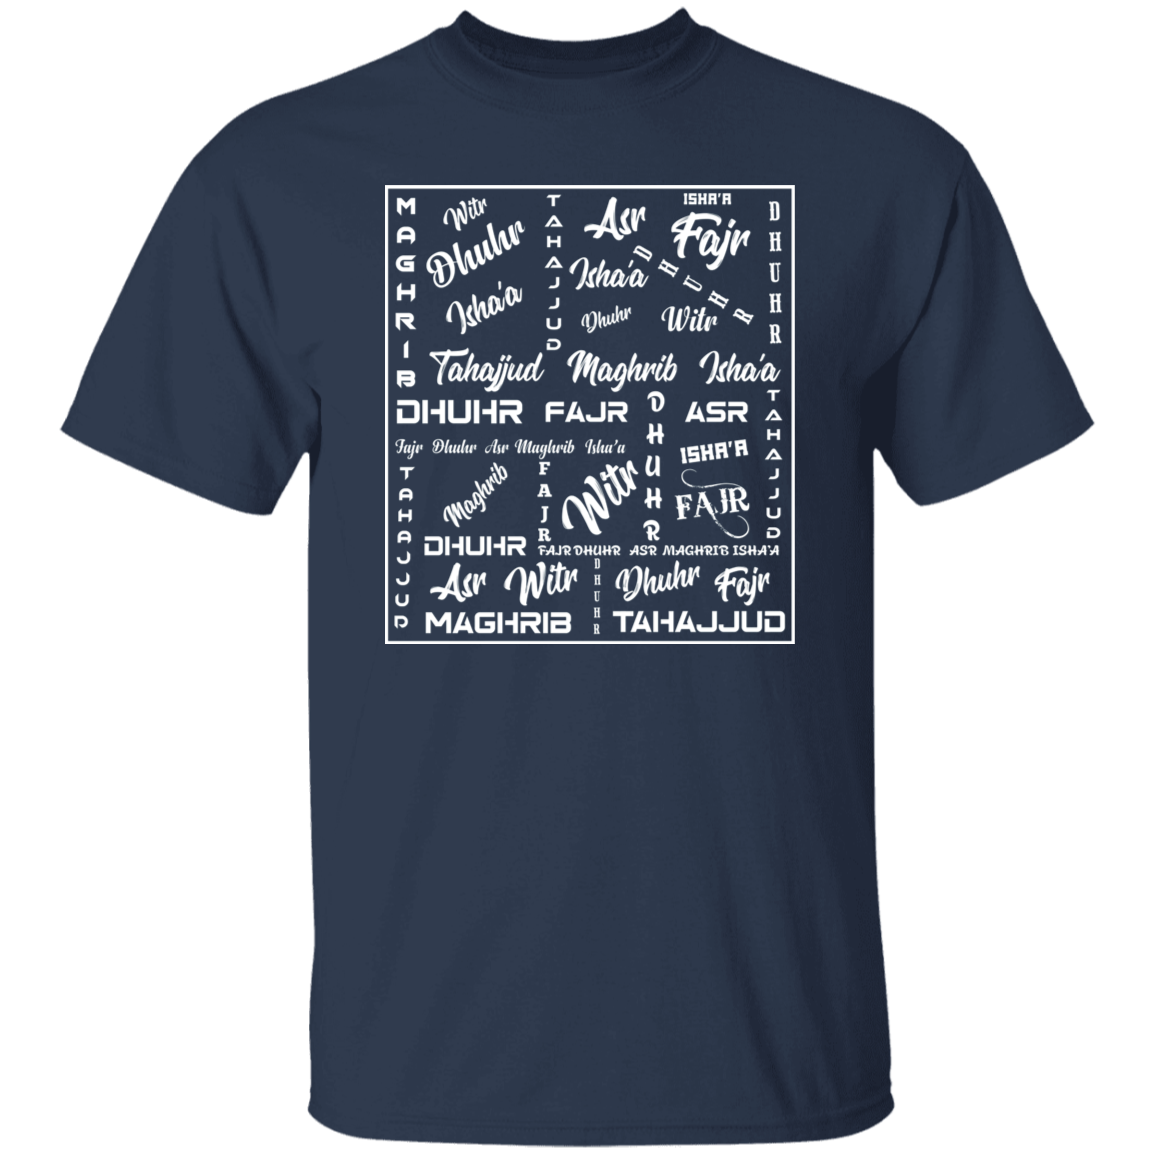 PRAYERS IN A SQUARE LOGO T-Shirt (MORE COLOR OPTIONS)